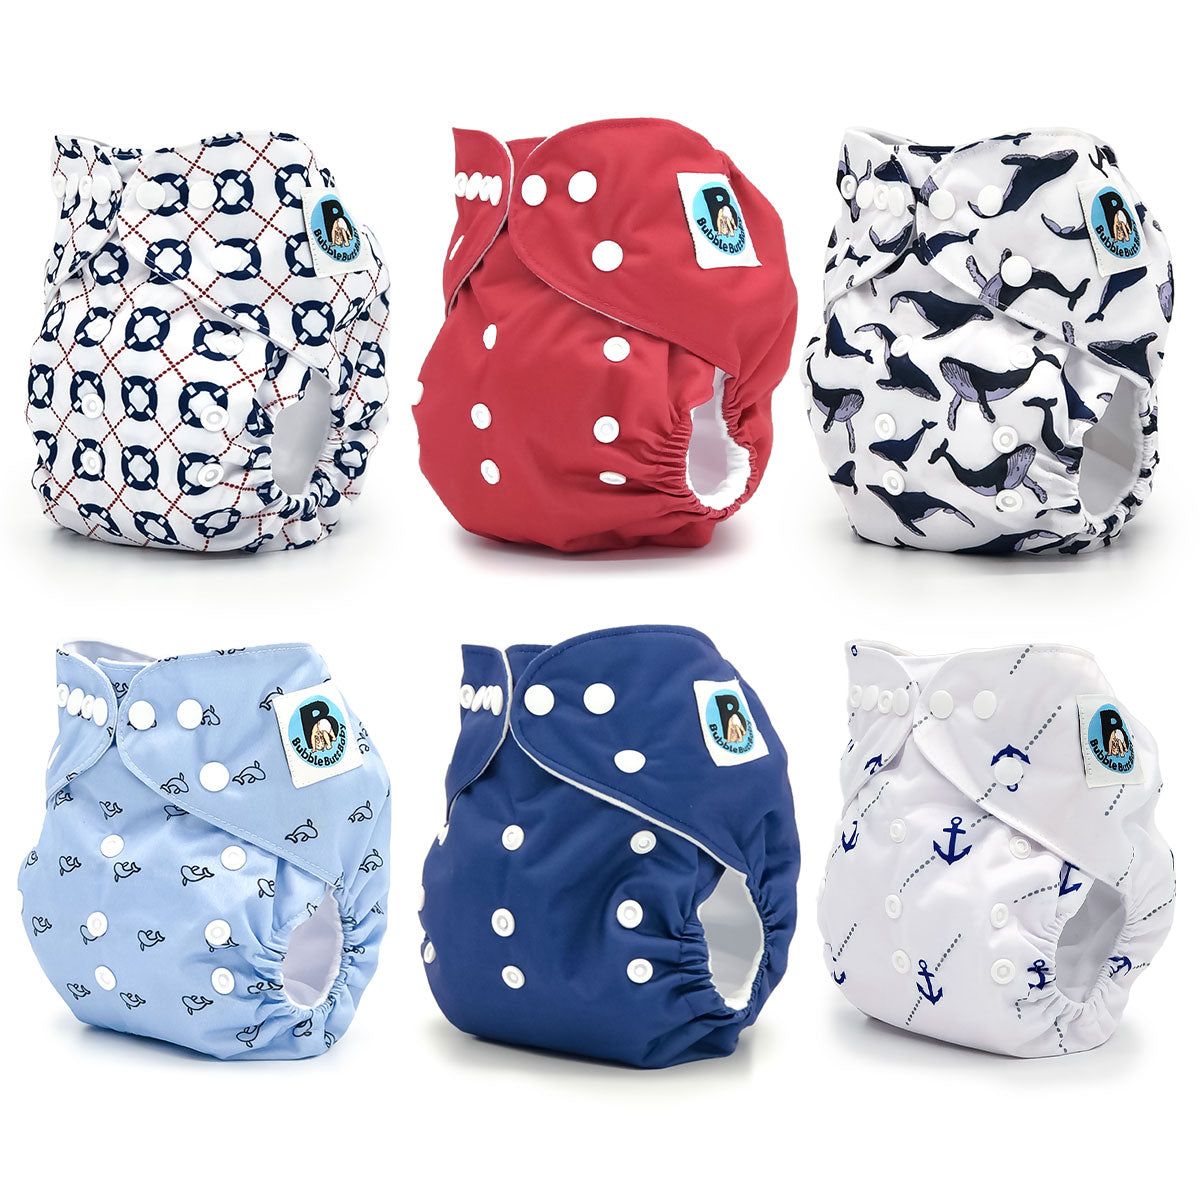 Yachtsman Cloth Diaper Collection